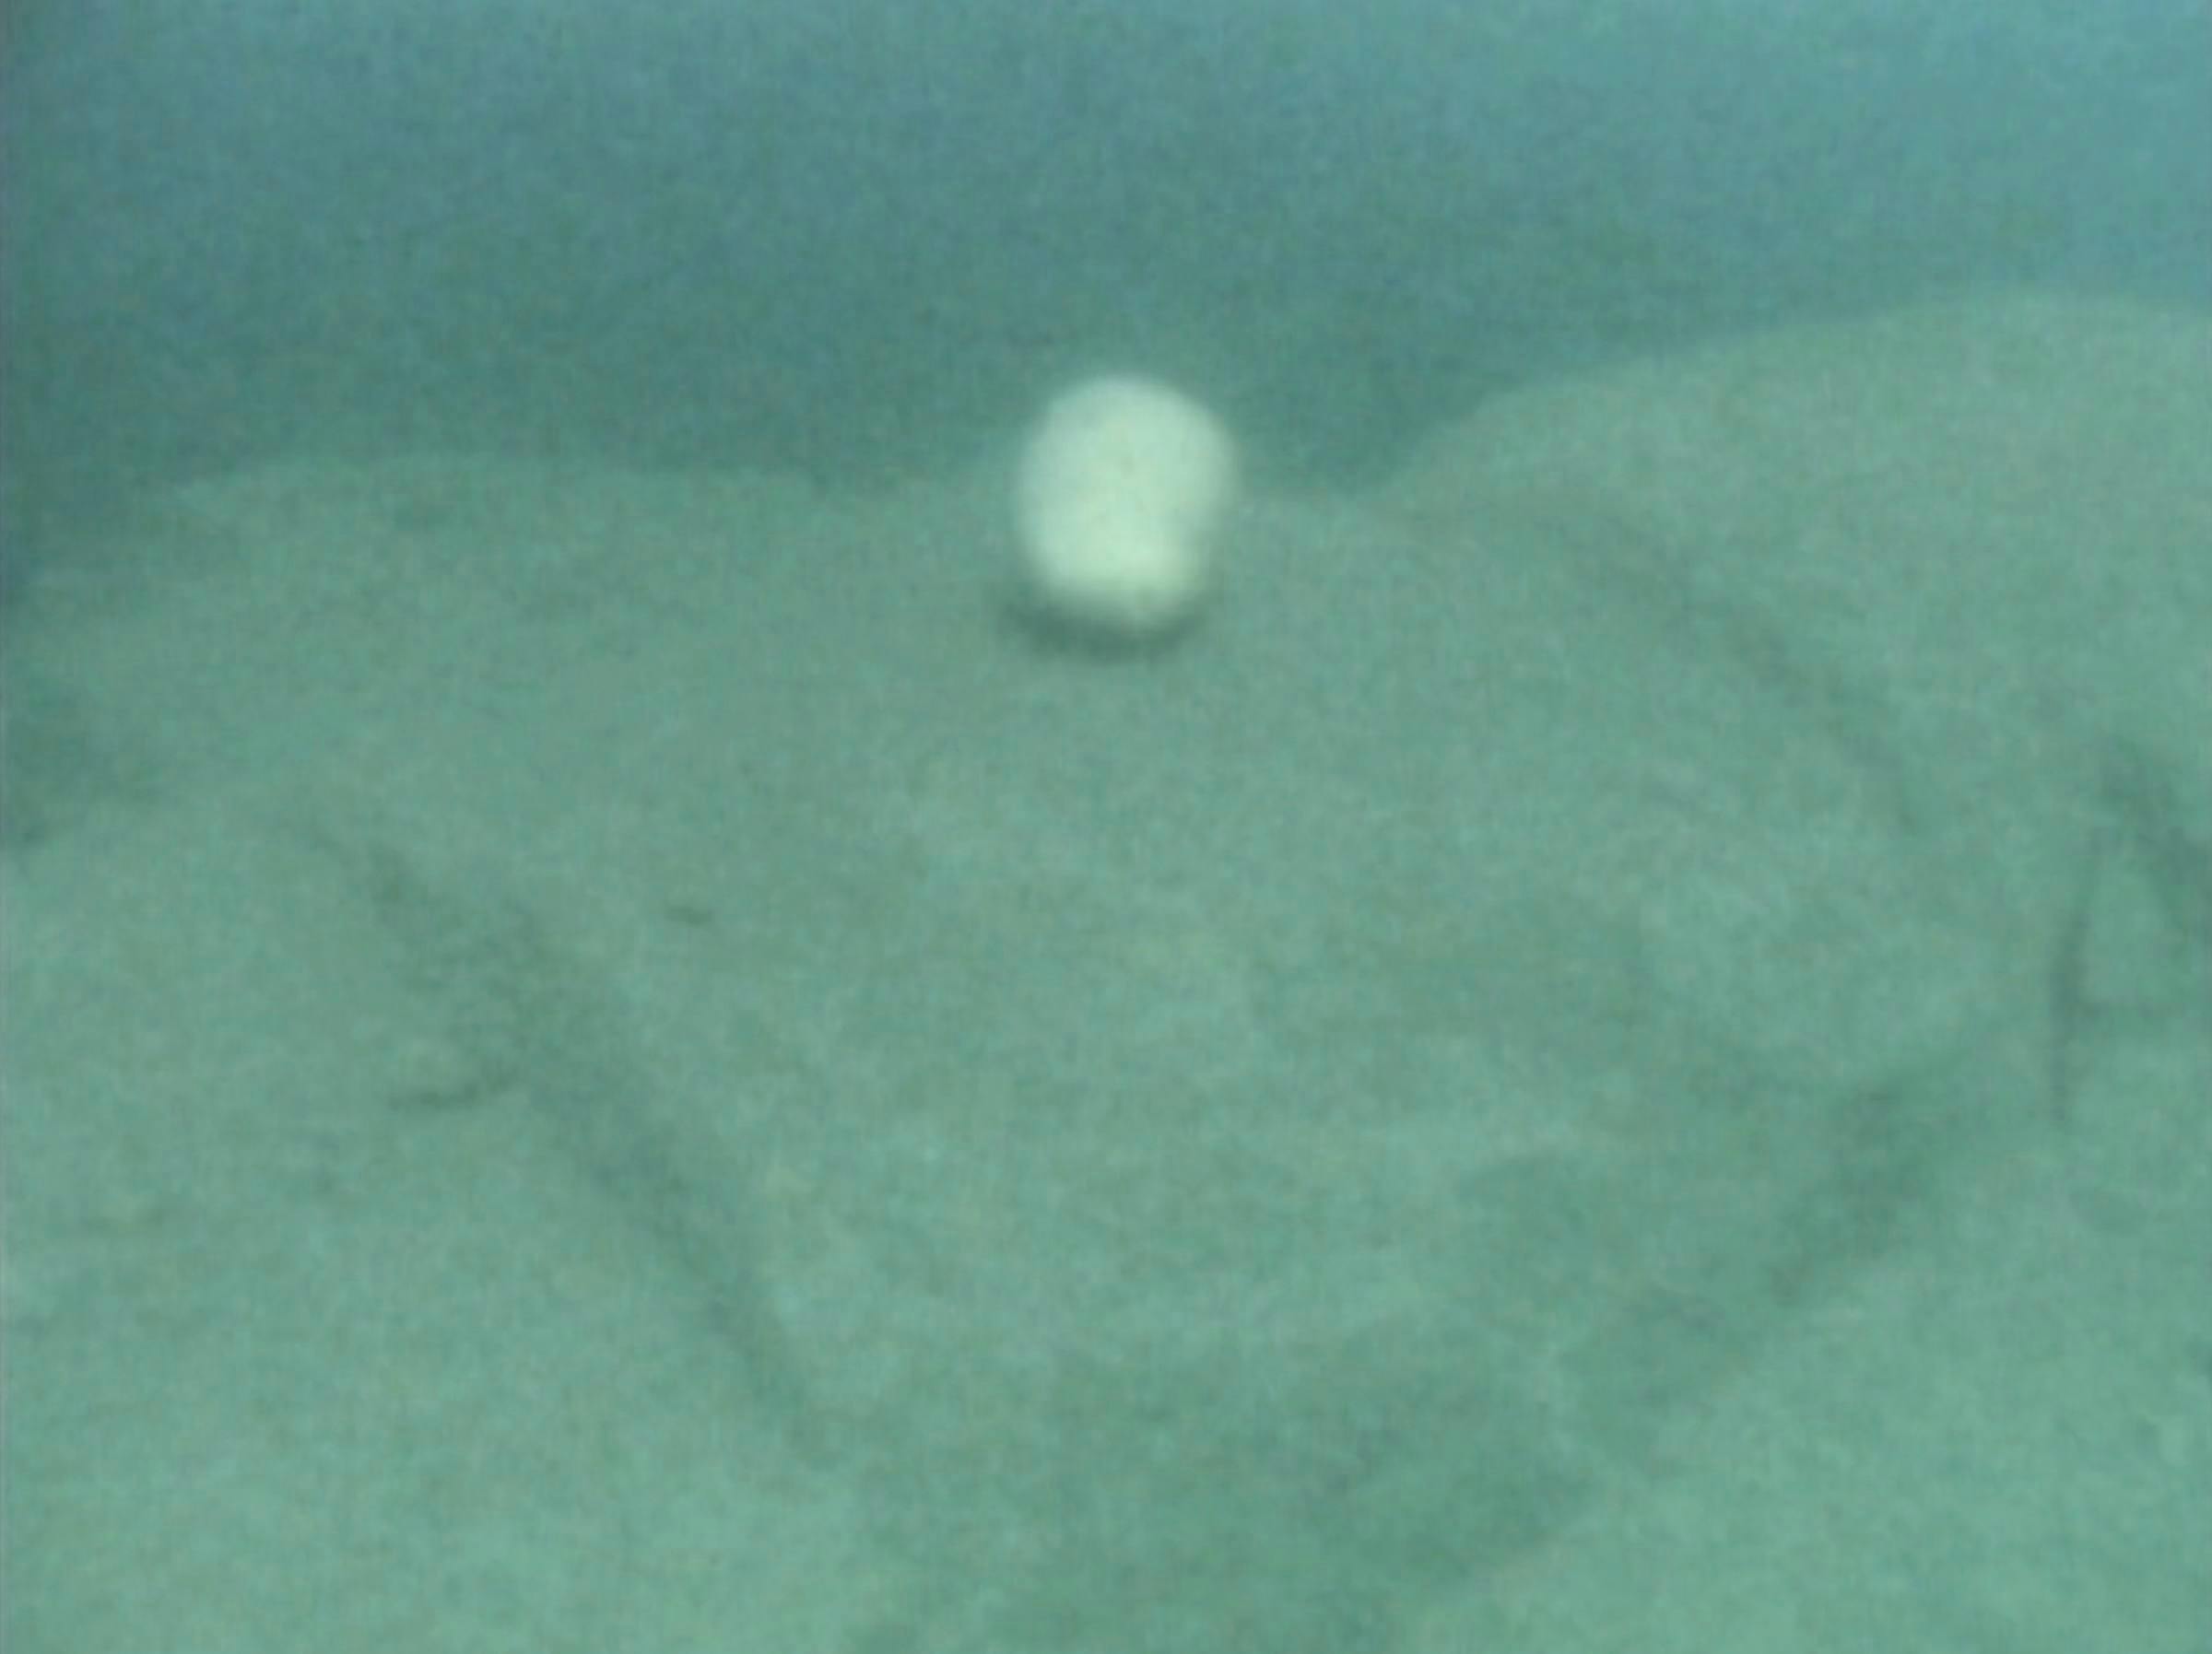 An image of a seabed with a white circular shape in the centre